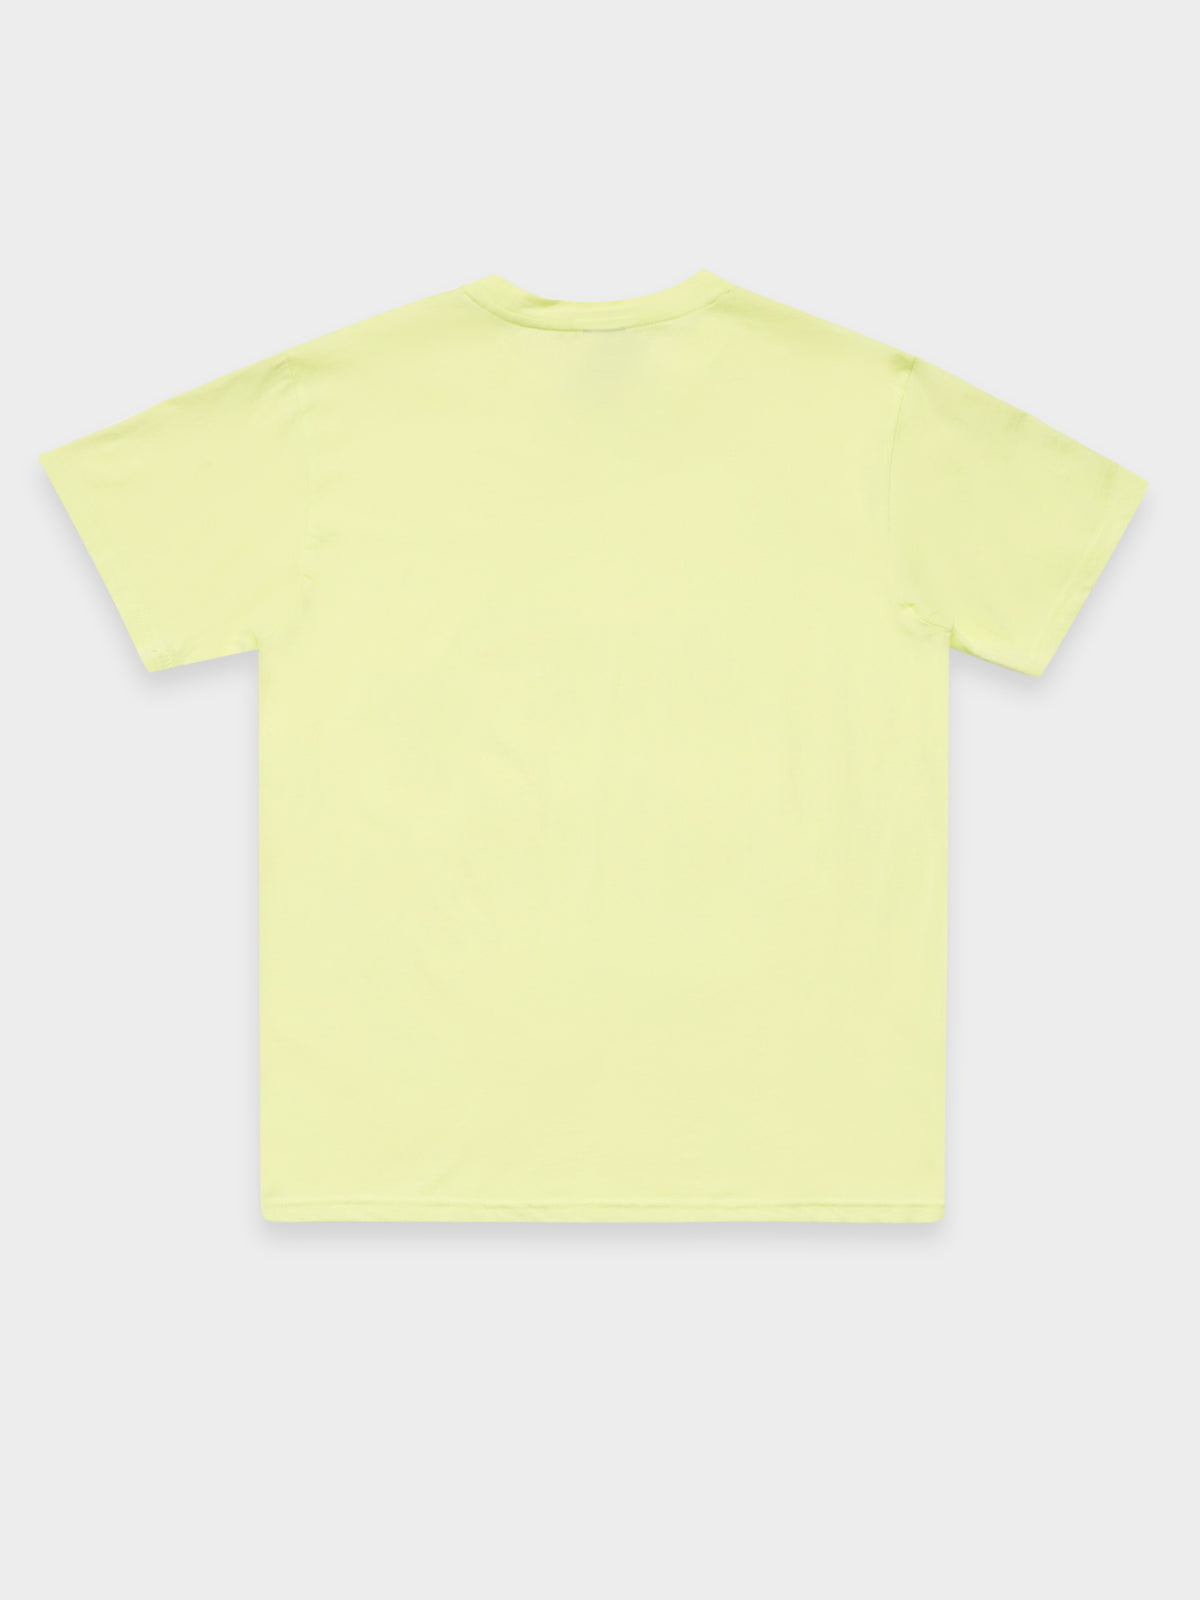 Heads Up T-Shirt in Yellow